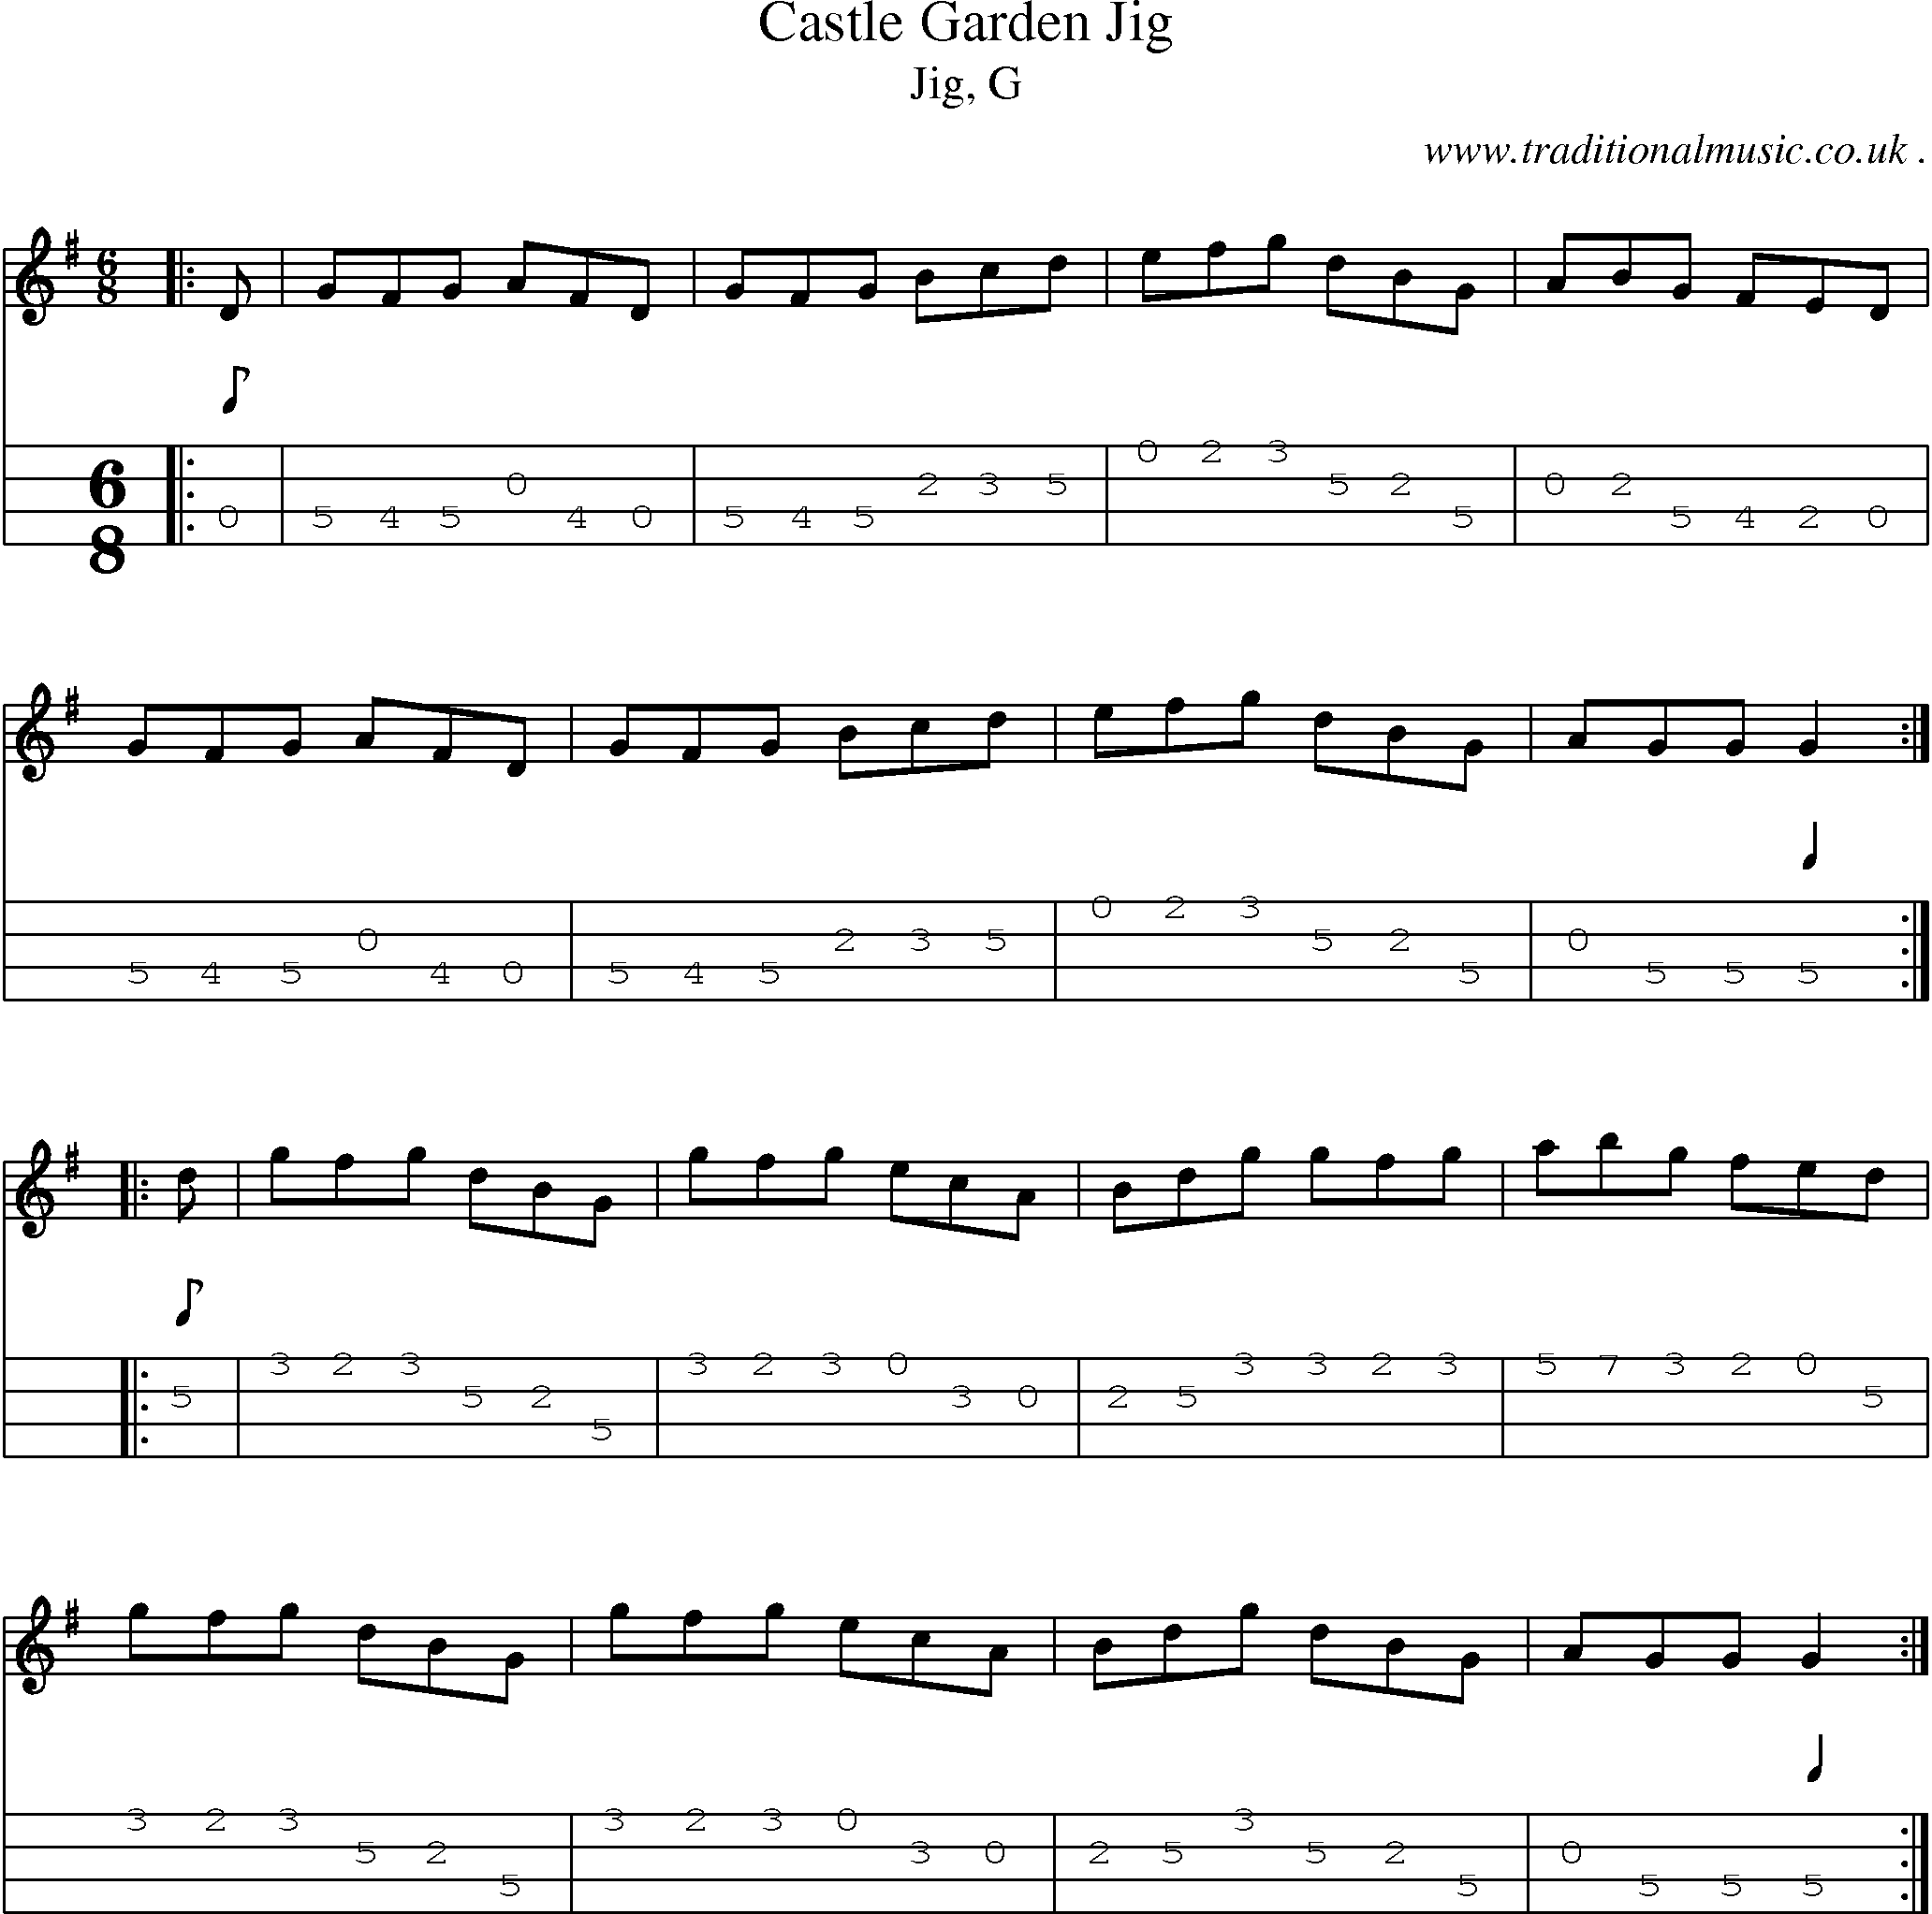 Sheet-music  score, Chords and Mandolin Tabs for Castle Garden Jig